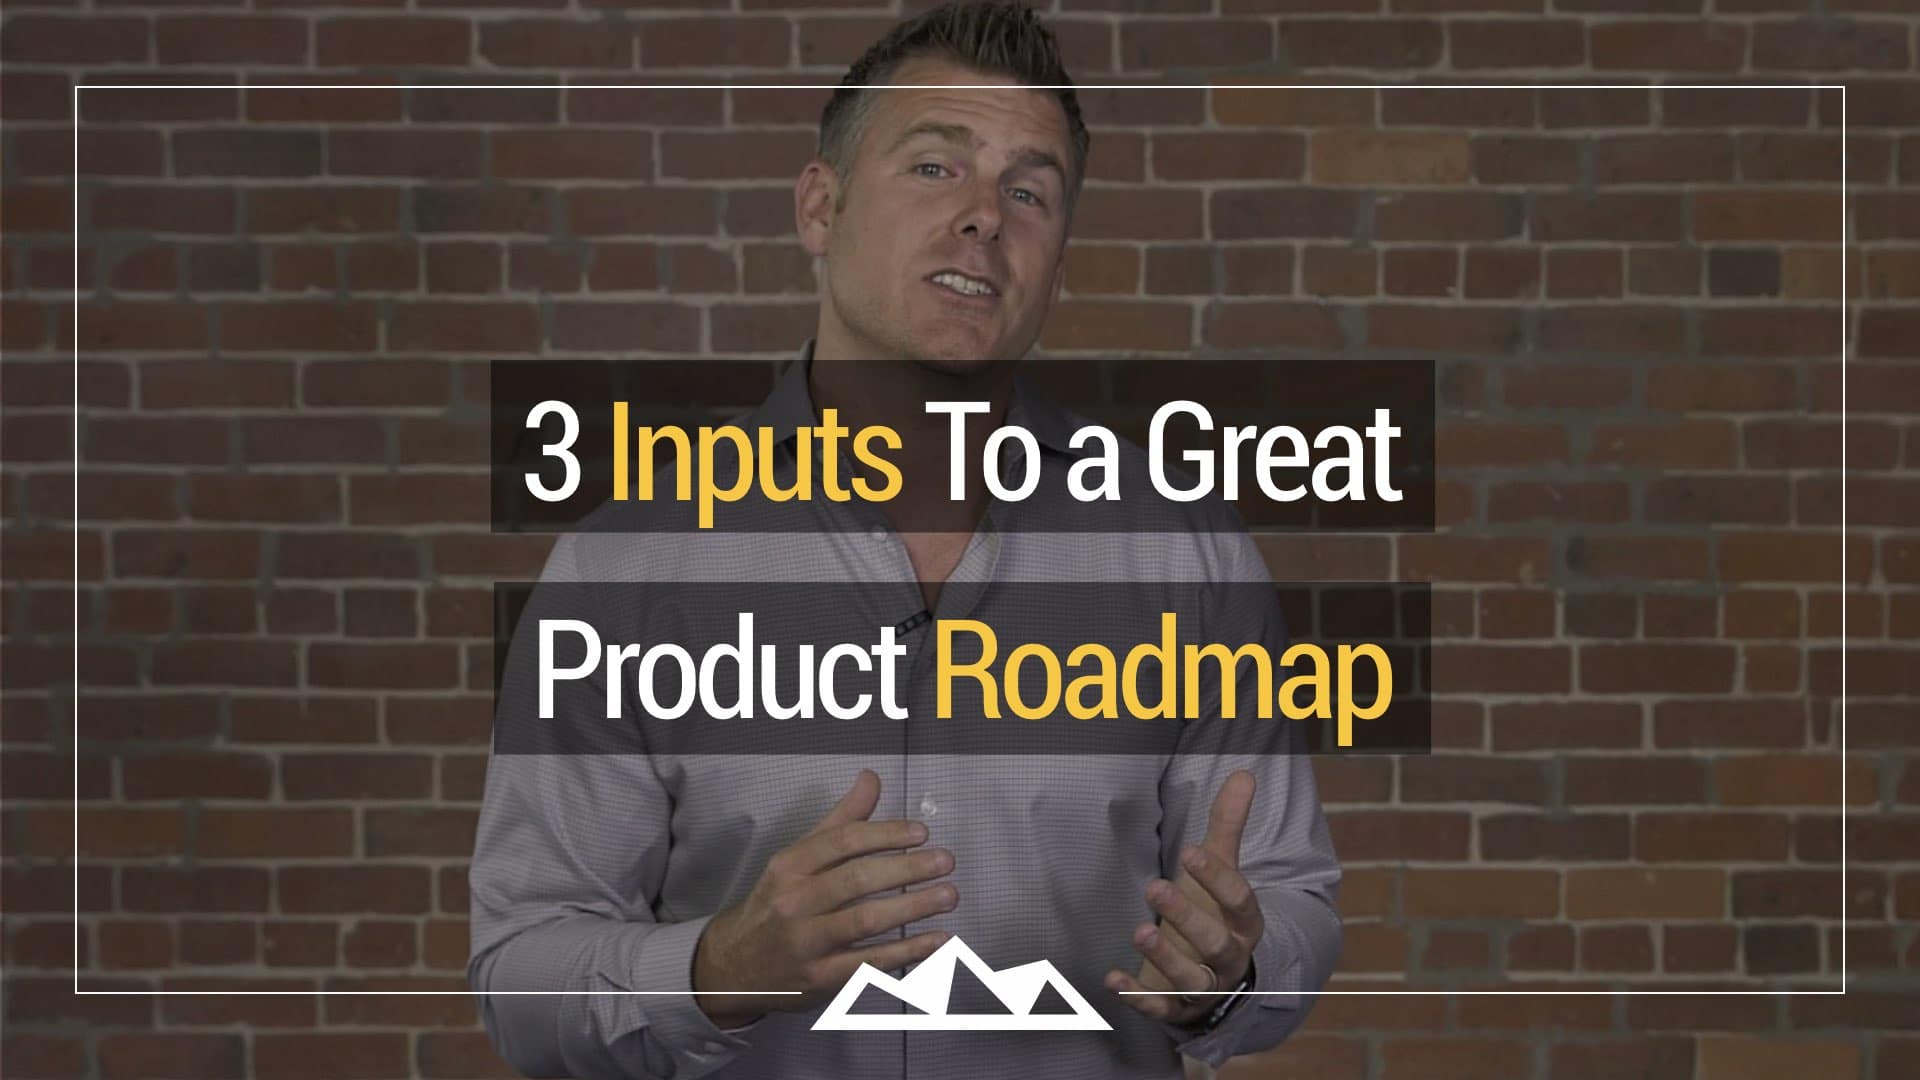 The 3 Inputs to a Great Product Roadmap